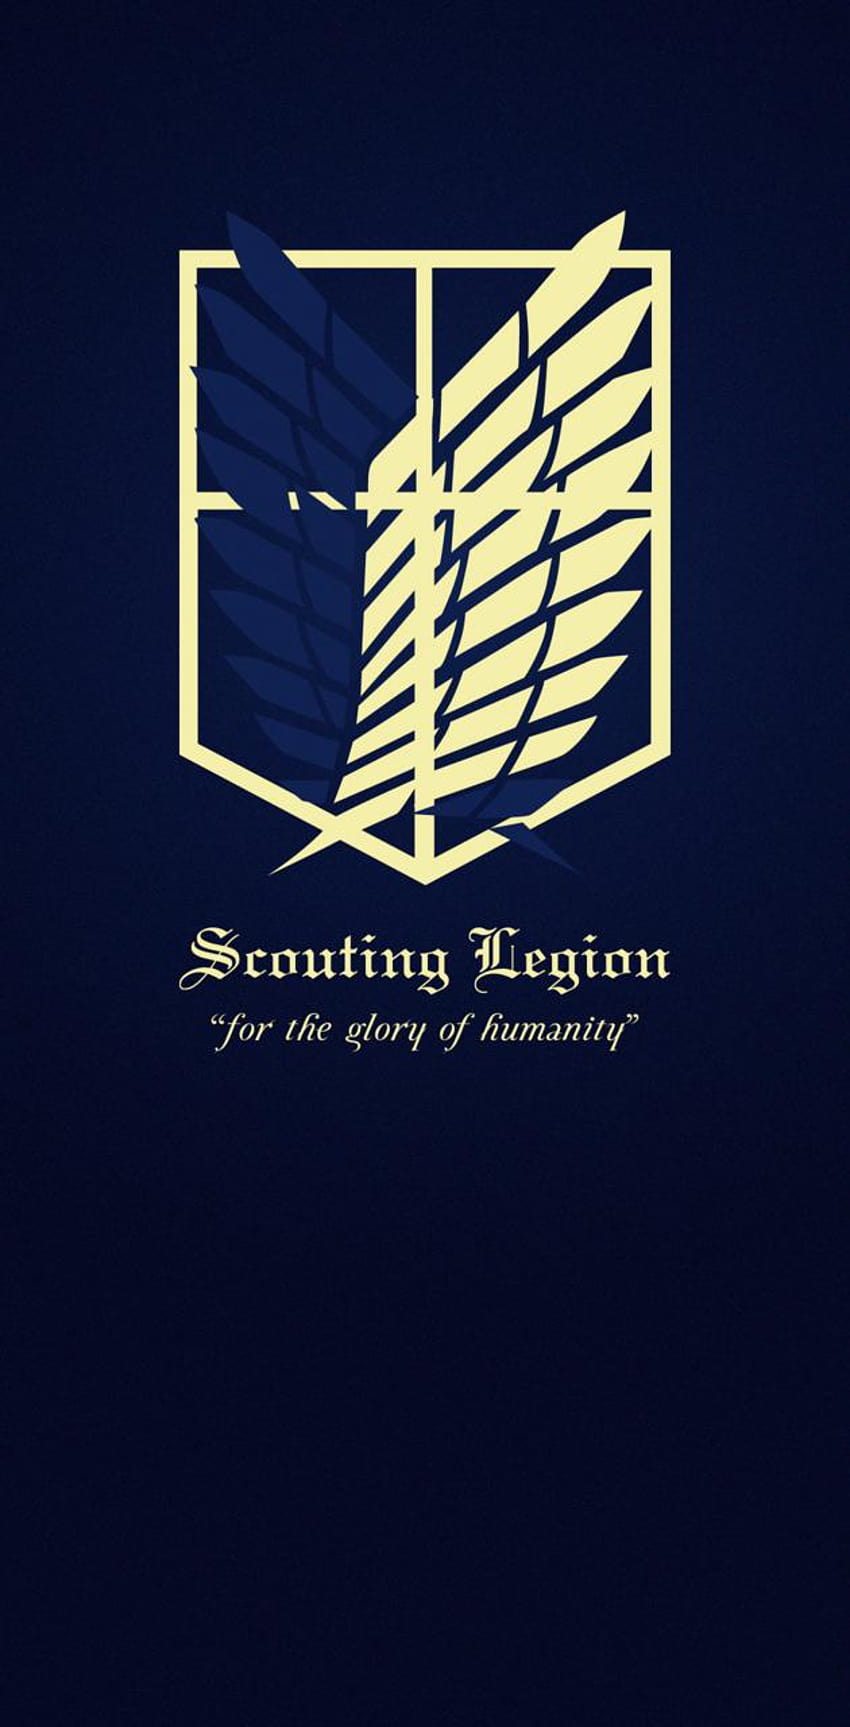 Scouting Legion by Studio929, scout regiment iphone HD phone wallpaper